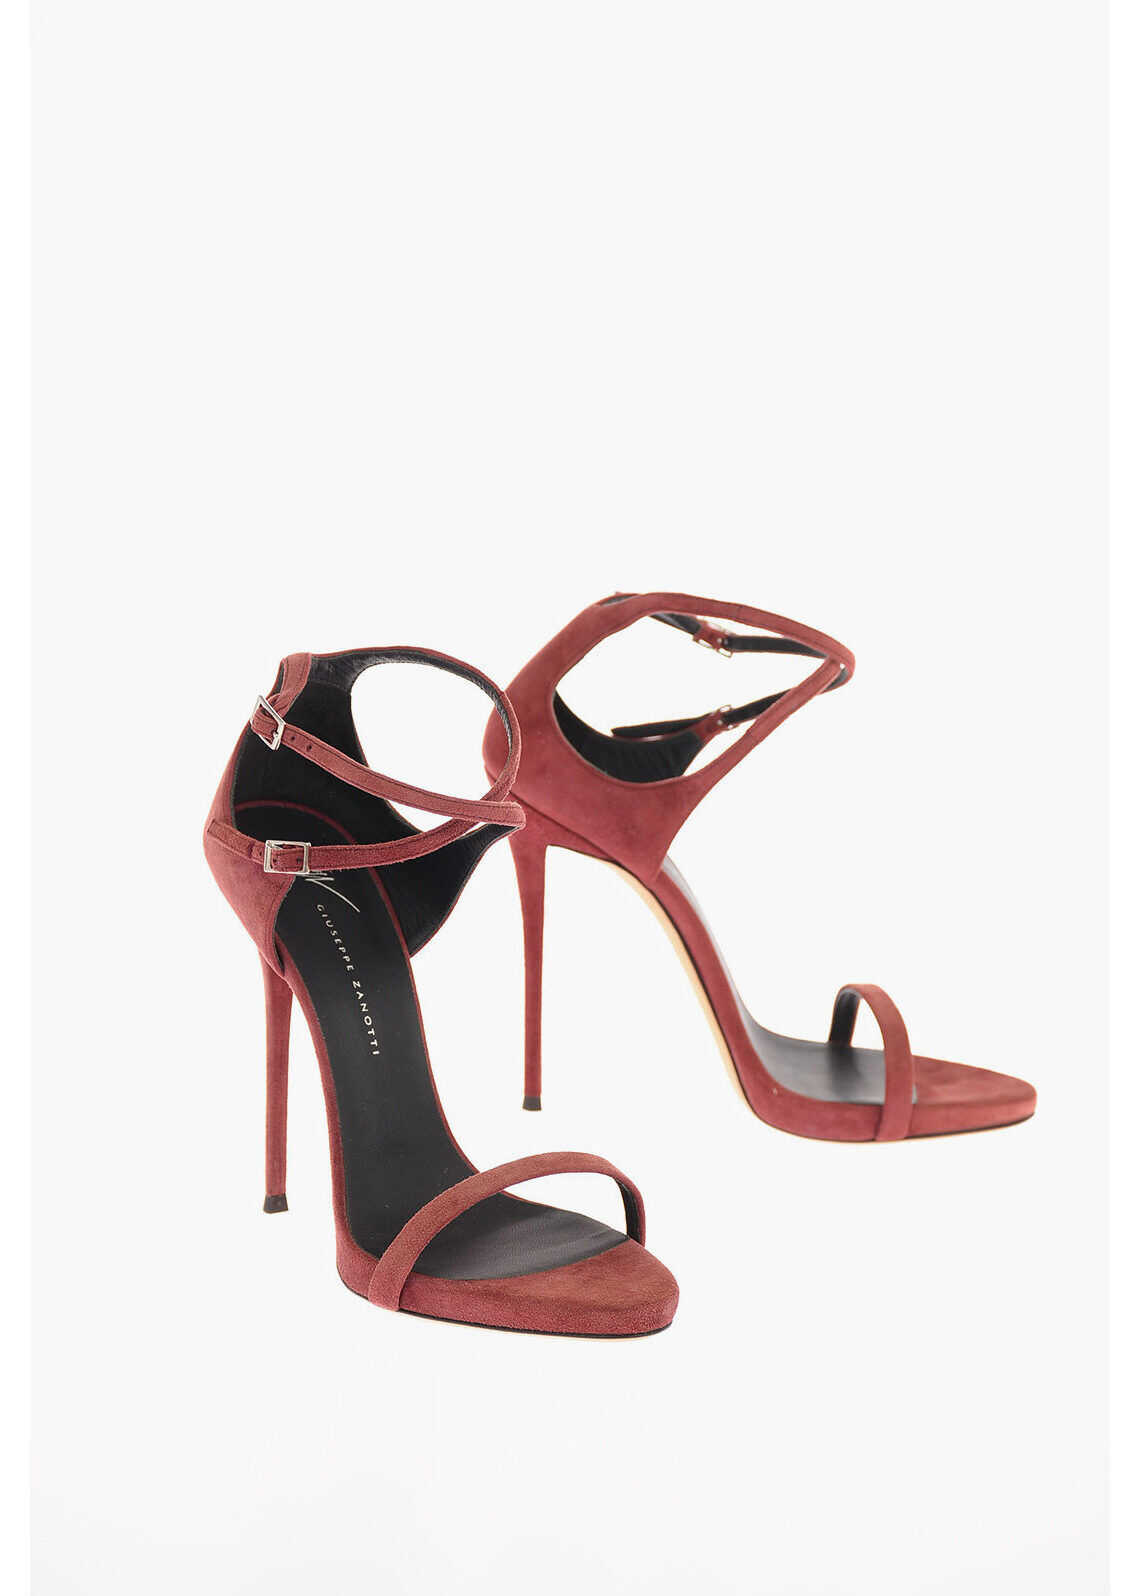 Giuseppe Zanotti Suede COLINE SANDALS with Double Ankle Strap 13cm BURGUNDY